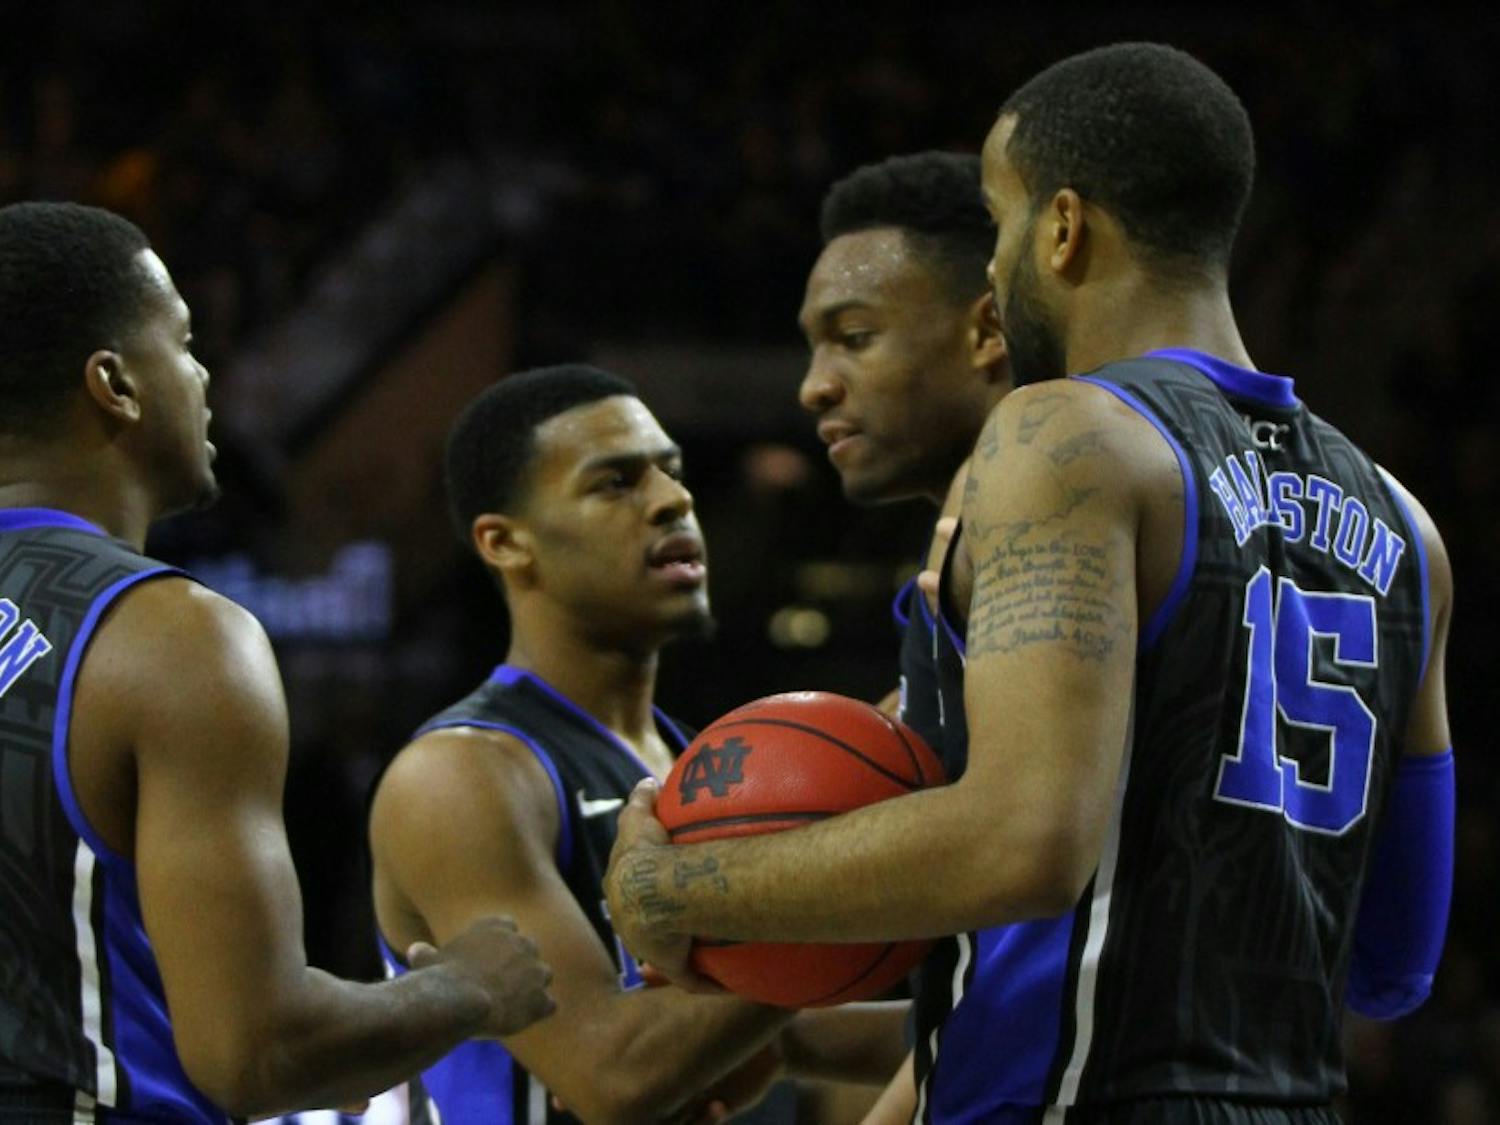 Duke's loss to Notre Dame Saturday was the latest defeat the Blue Devils have suffered wearing their black alternate jerseys, which have often accompanied upset defeats in the past 16 seasons.